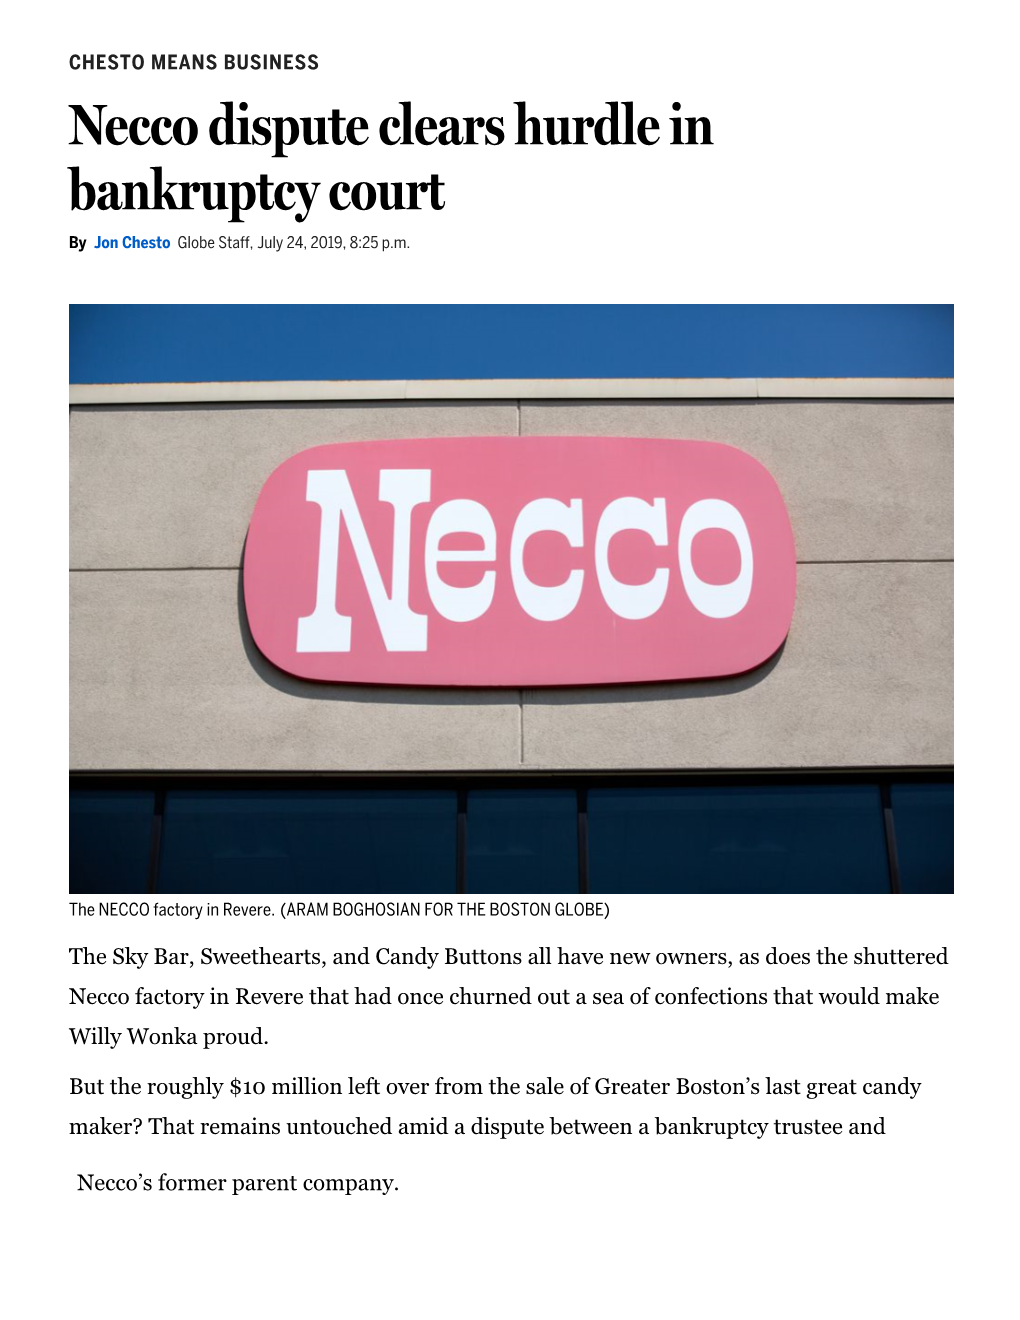 Necco Dispute Clears Hurdle in Bankrtuptcy Court